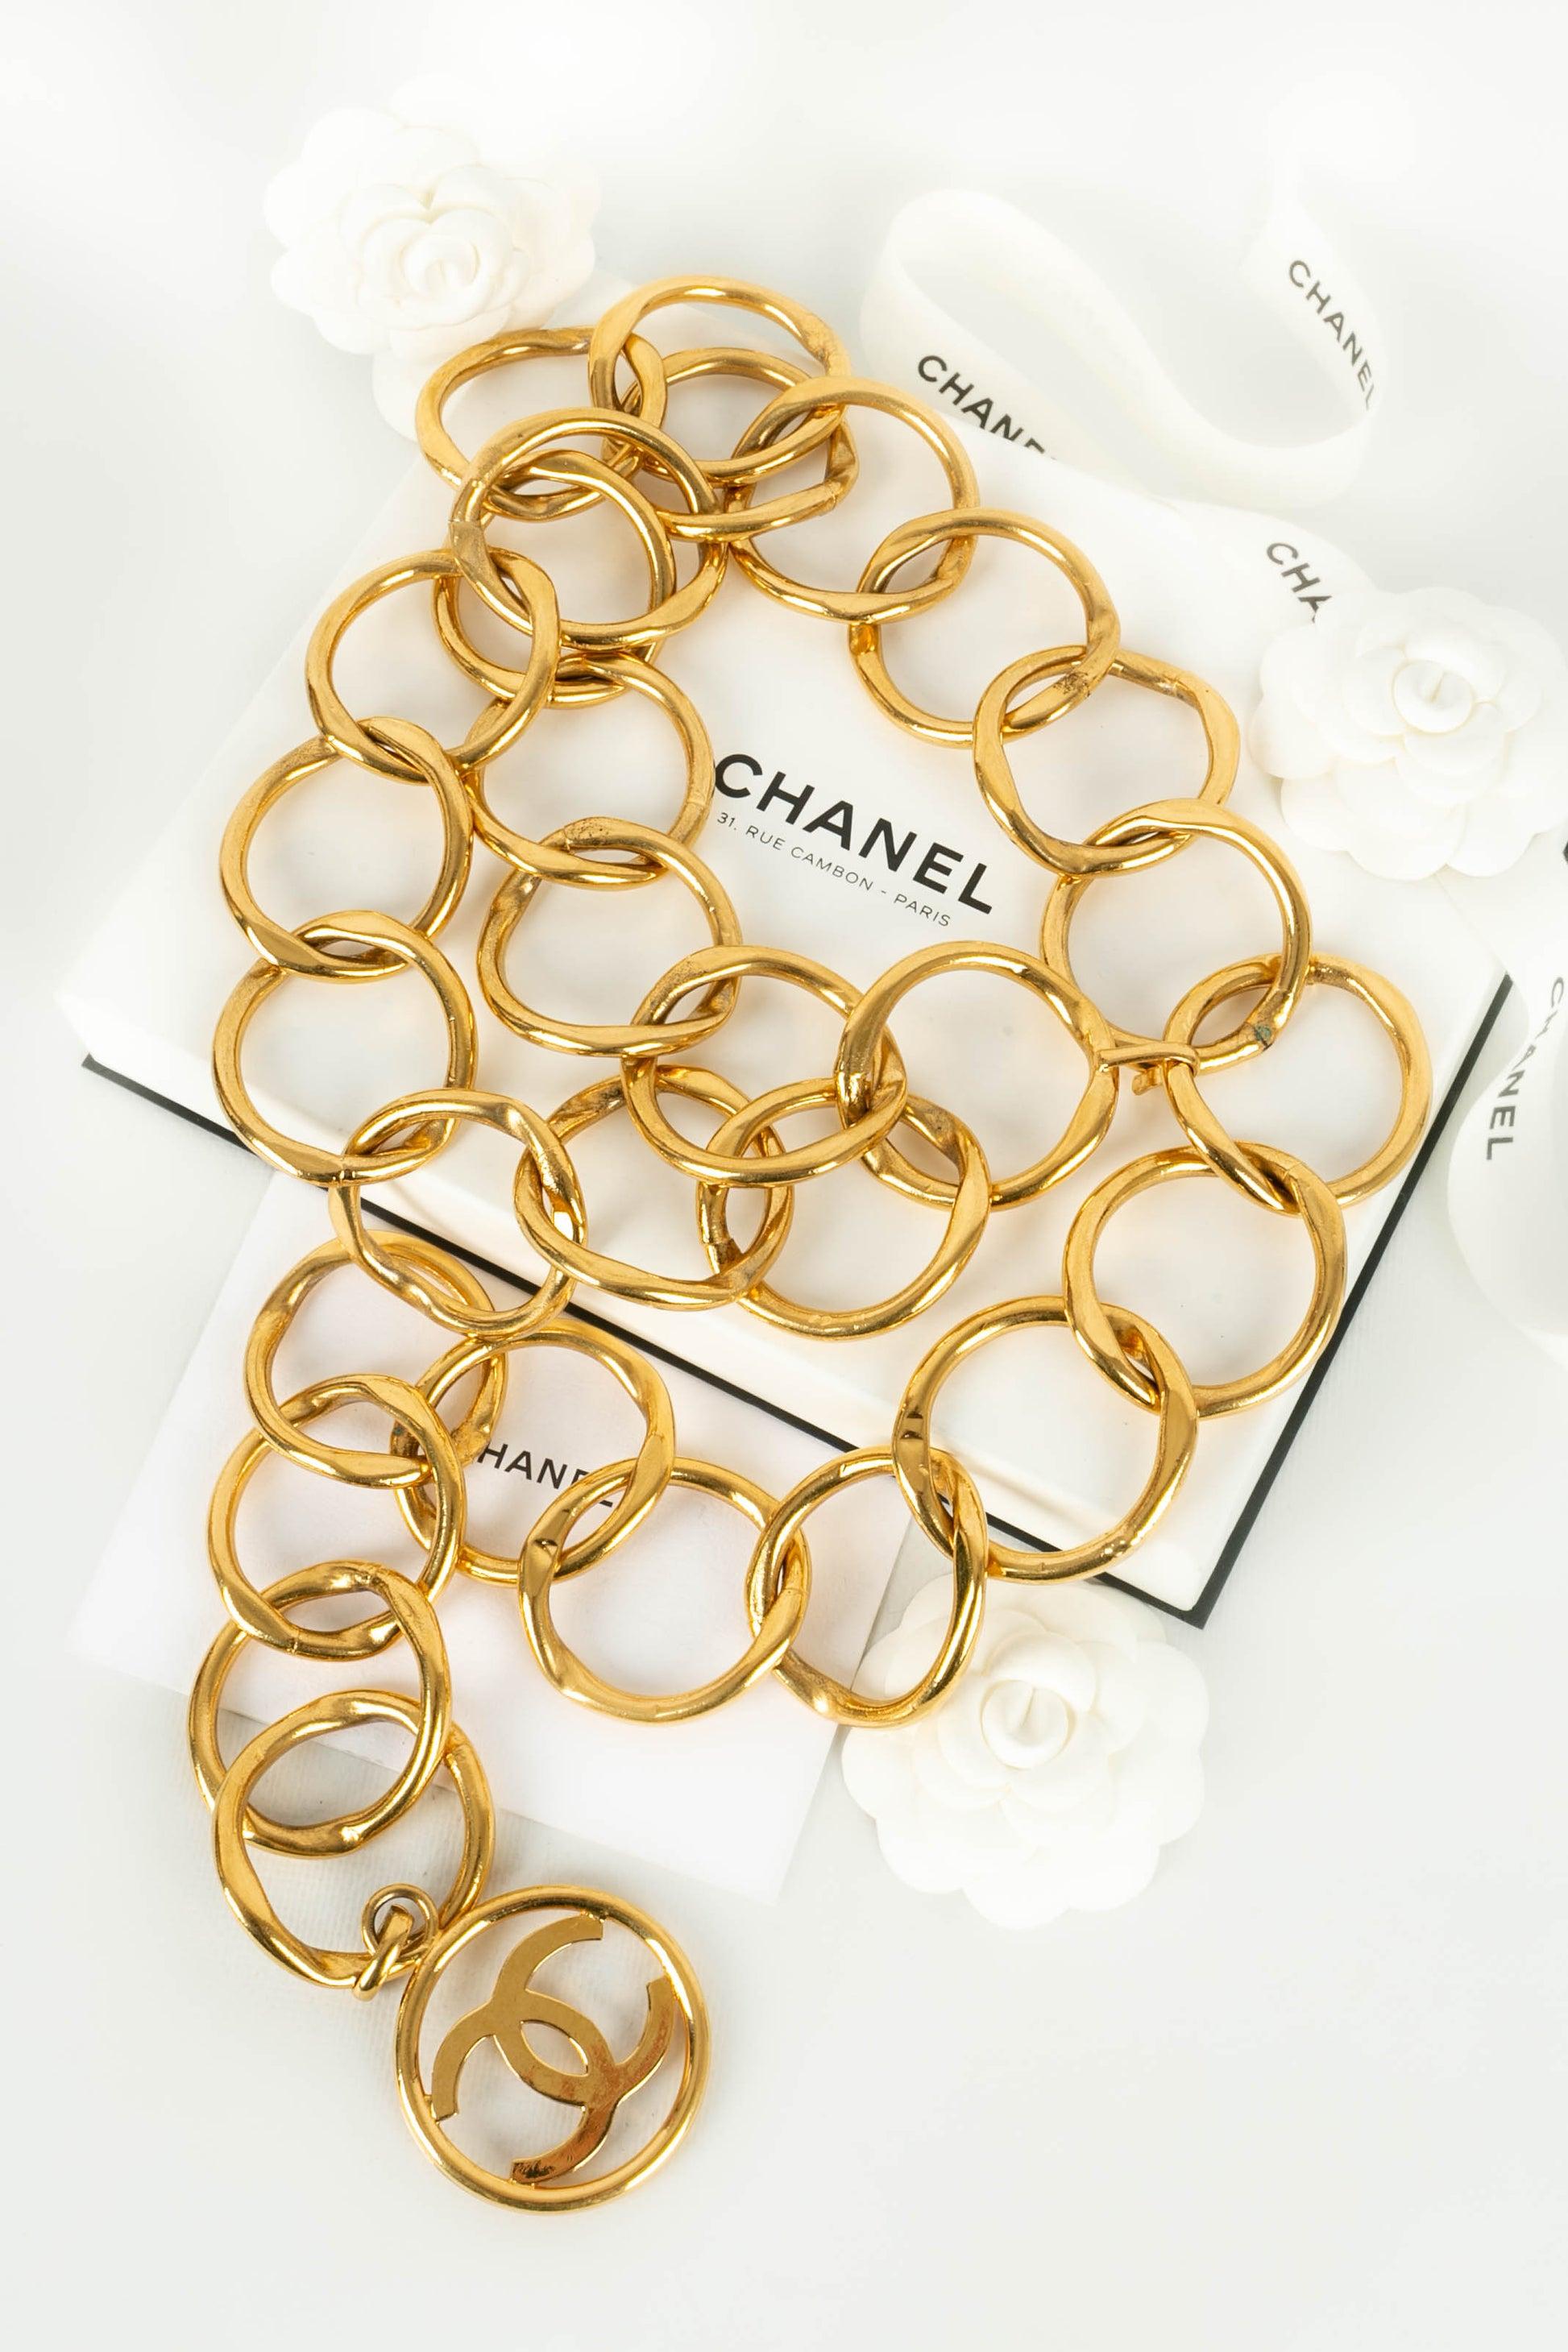 Chanel Belt Composed of Big Links in Gold-Plated Metal, 1990s For Sale 6